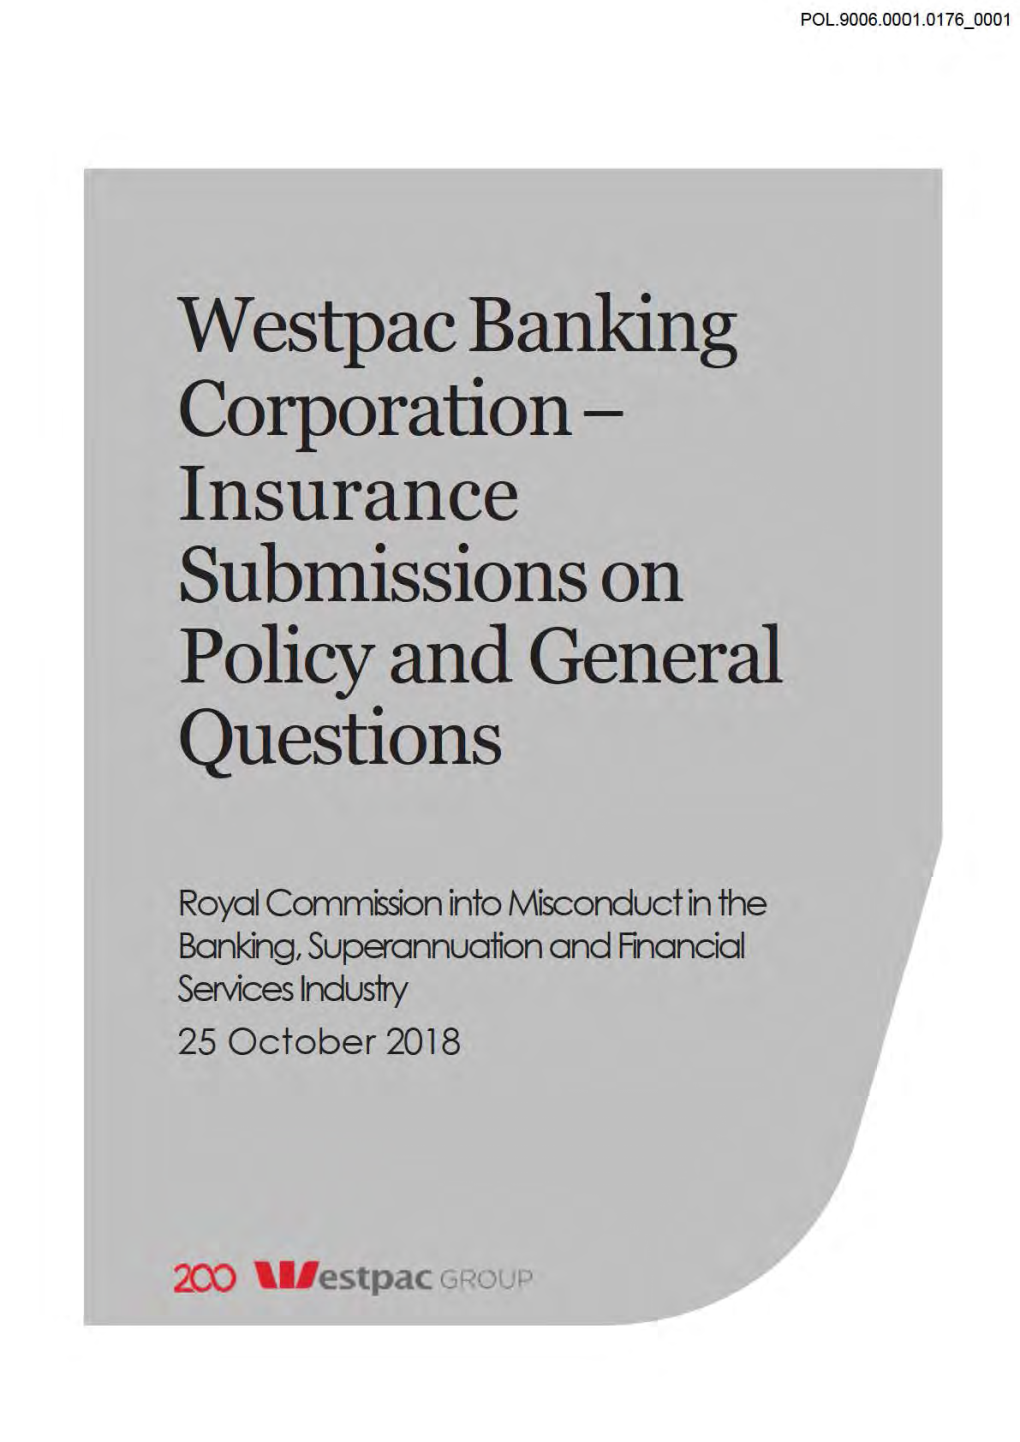 Westpac Banking Corporation - Insurance Submissions on Policy and General Questions